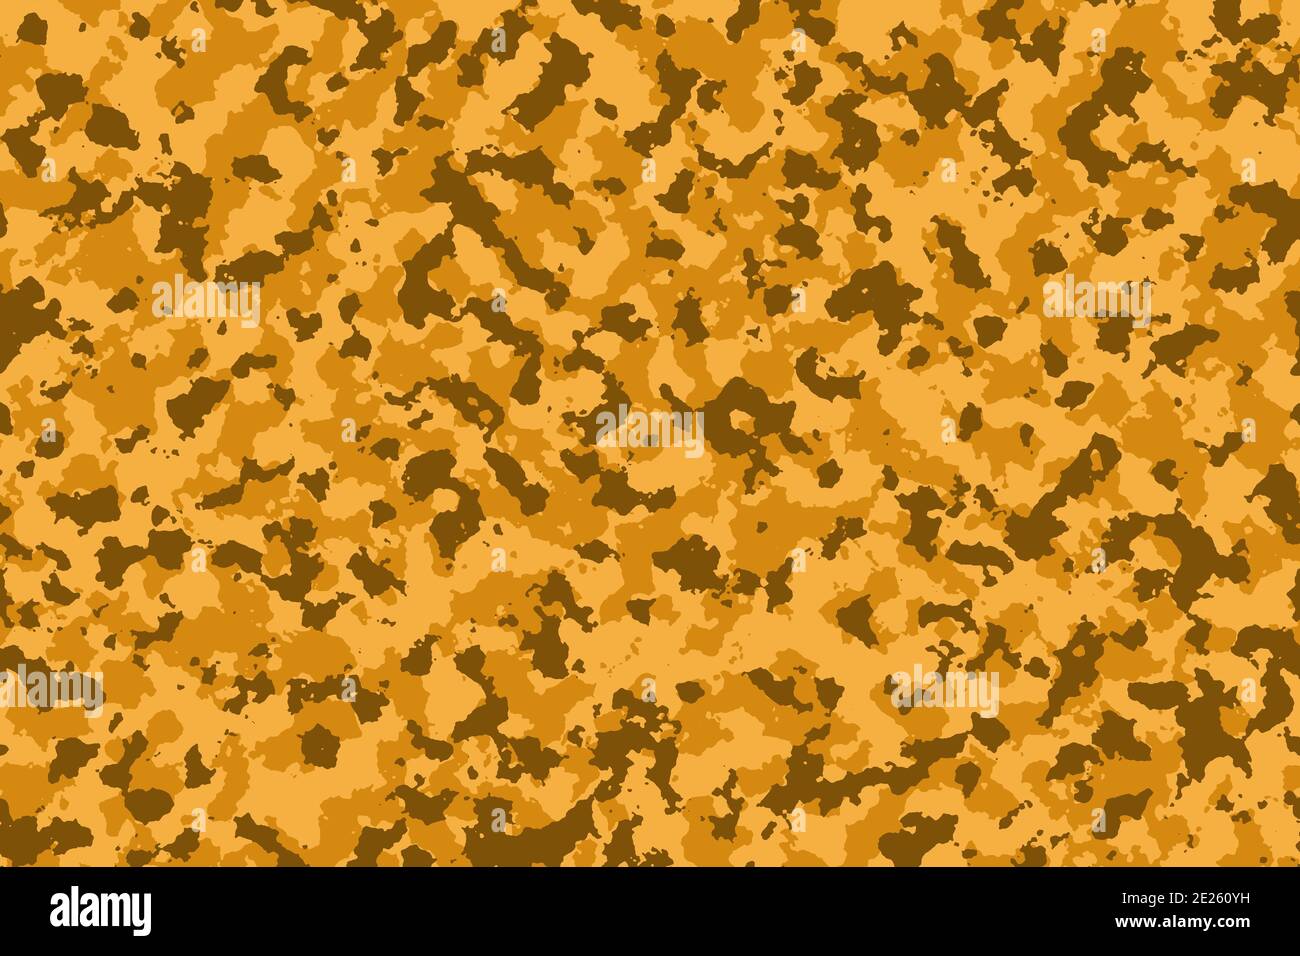 Desert camouflage military background pattern. Yellow brown color texture illustration Stock Photo